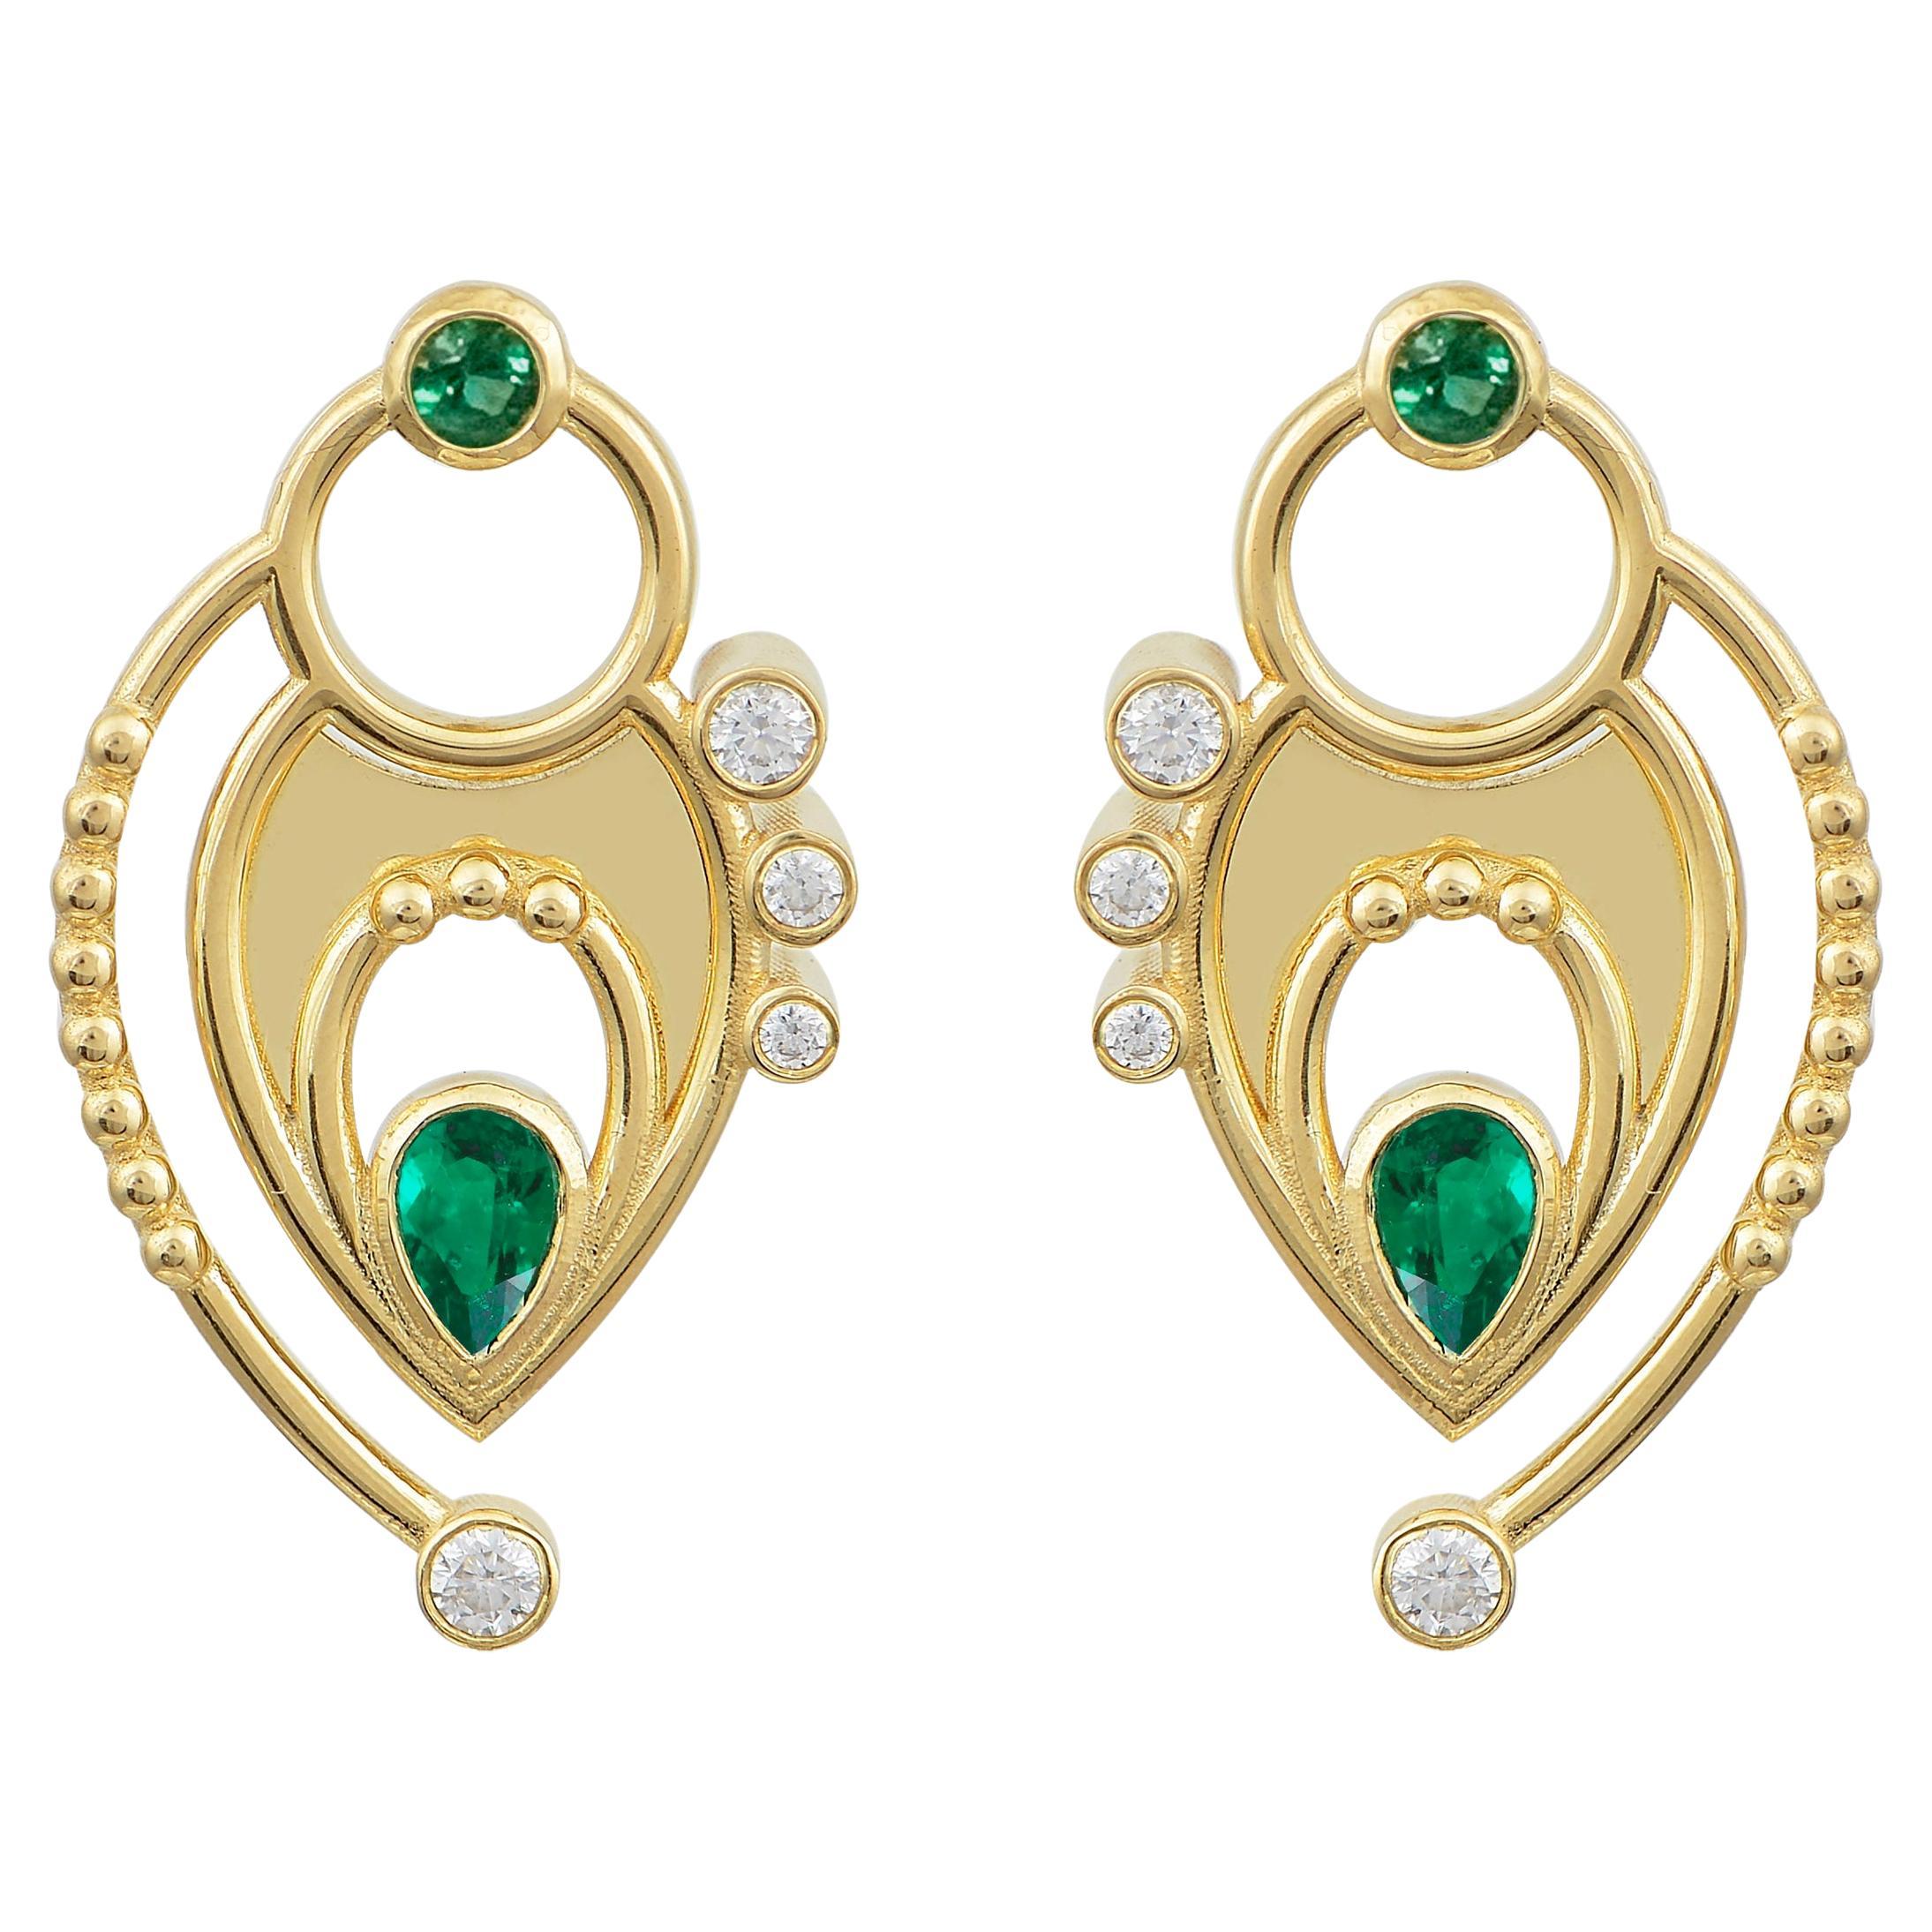 Pear Shaped Earrings in 18 Karat Yellow Gold with Diamonds And Emeralds